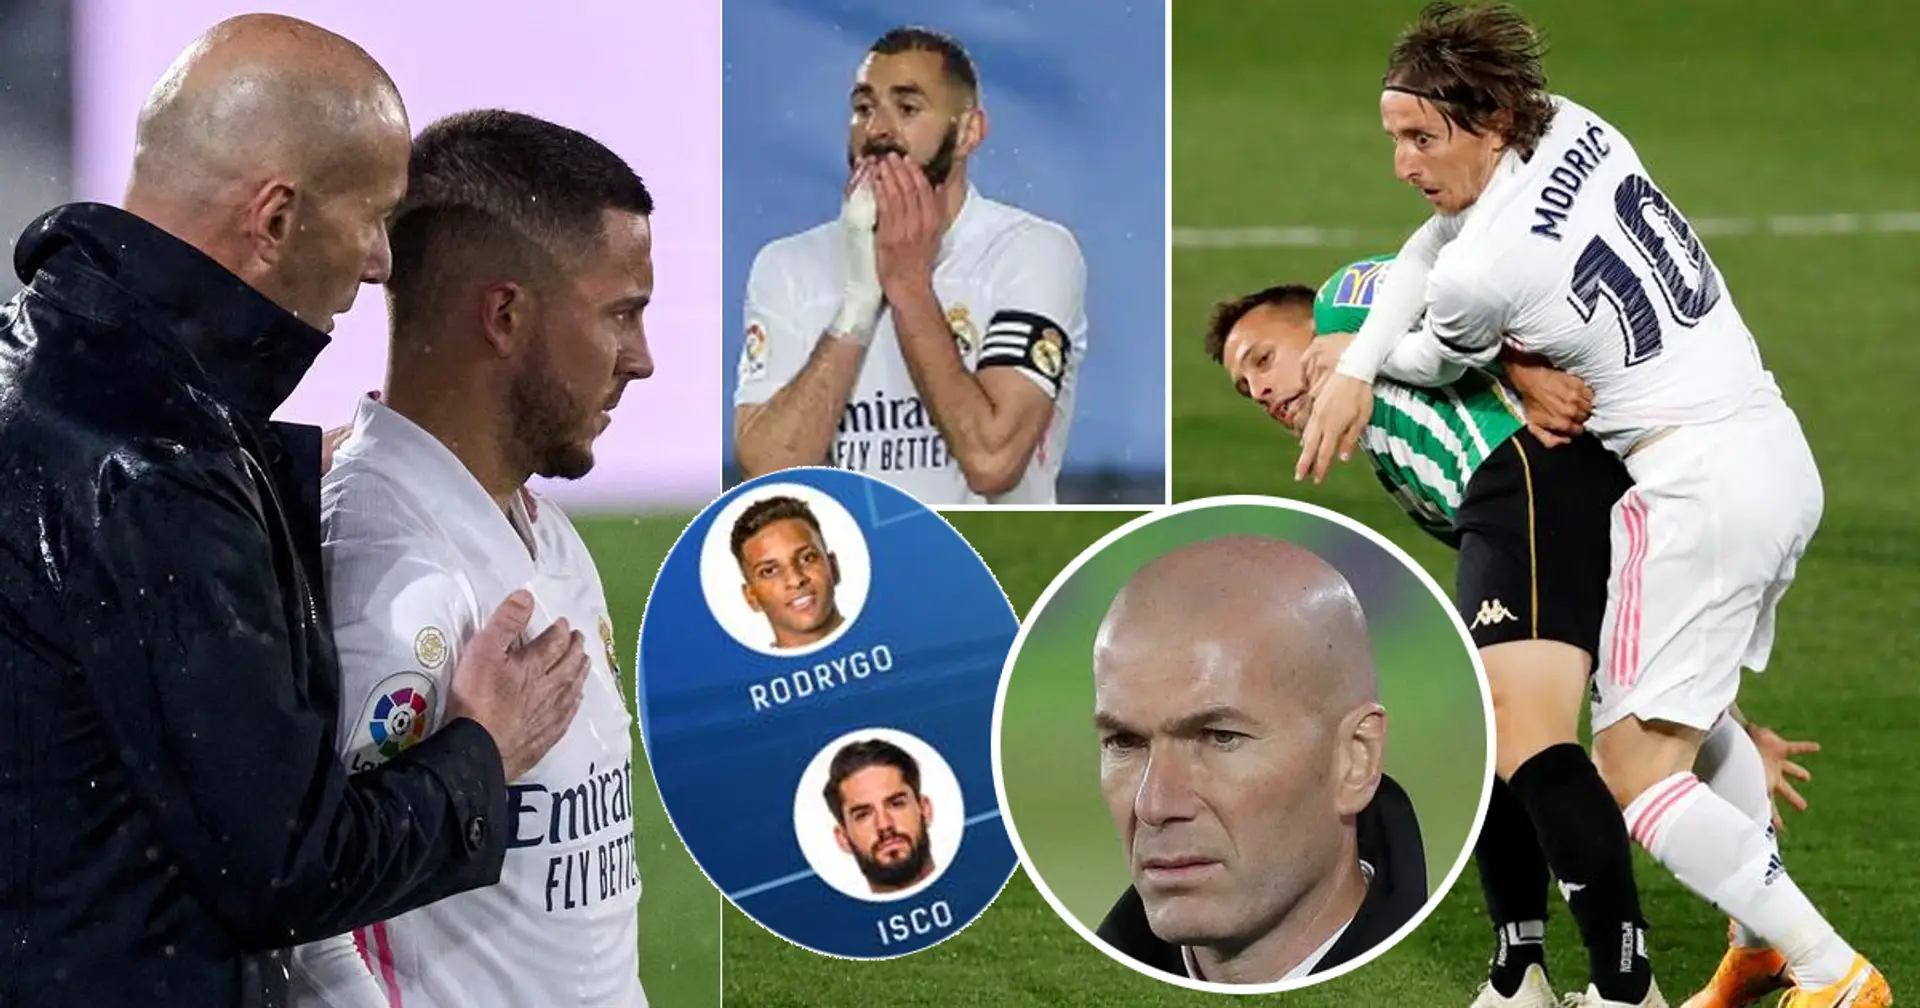 Changing winning formation & gambling on Isco: assessing Zidane's decisions in Betis draw on 1 to 10 scale